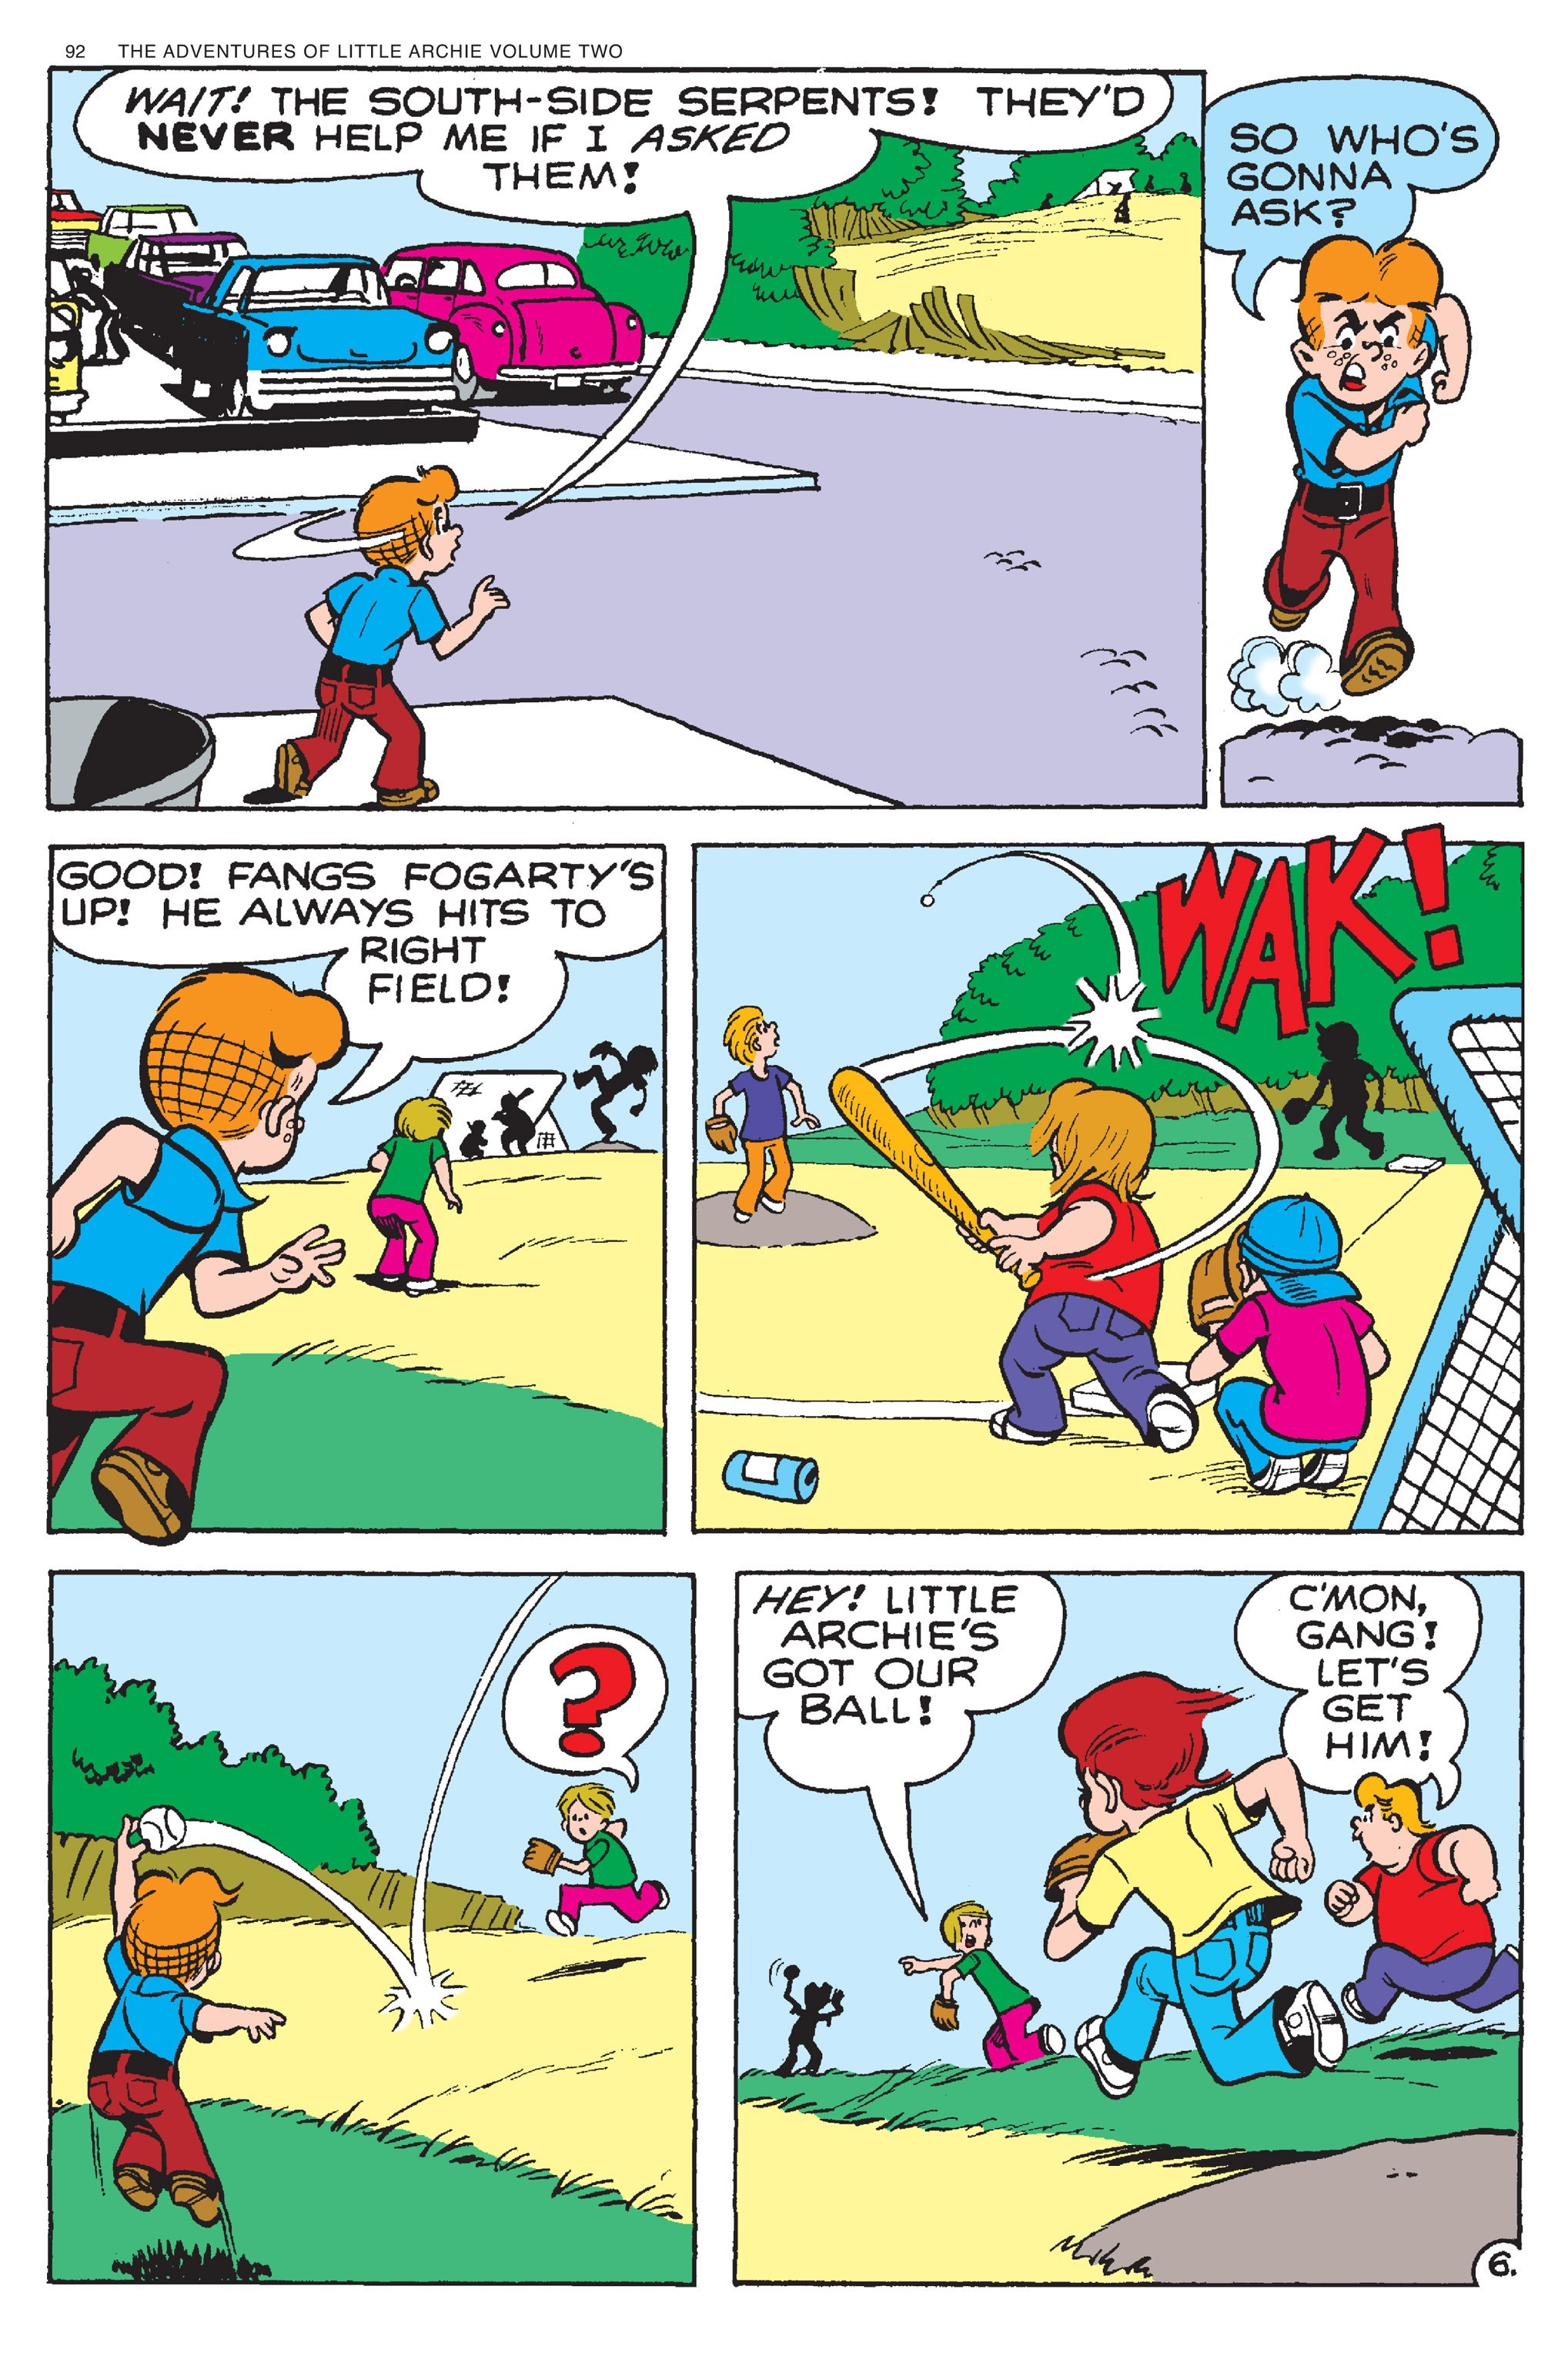 Read online Adventures of Little Archie comic -  Issue # TPB 2 - 93